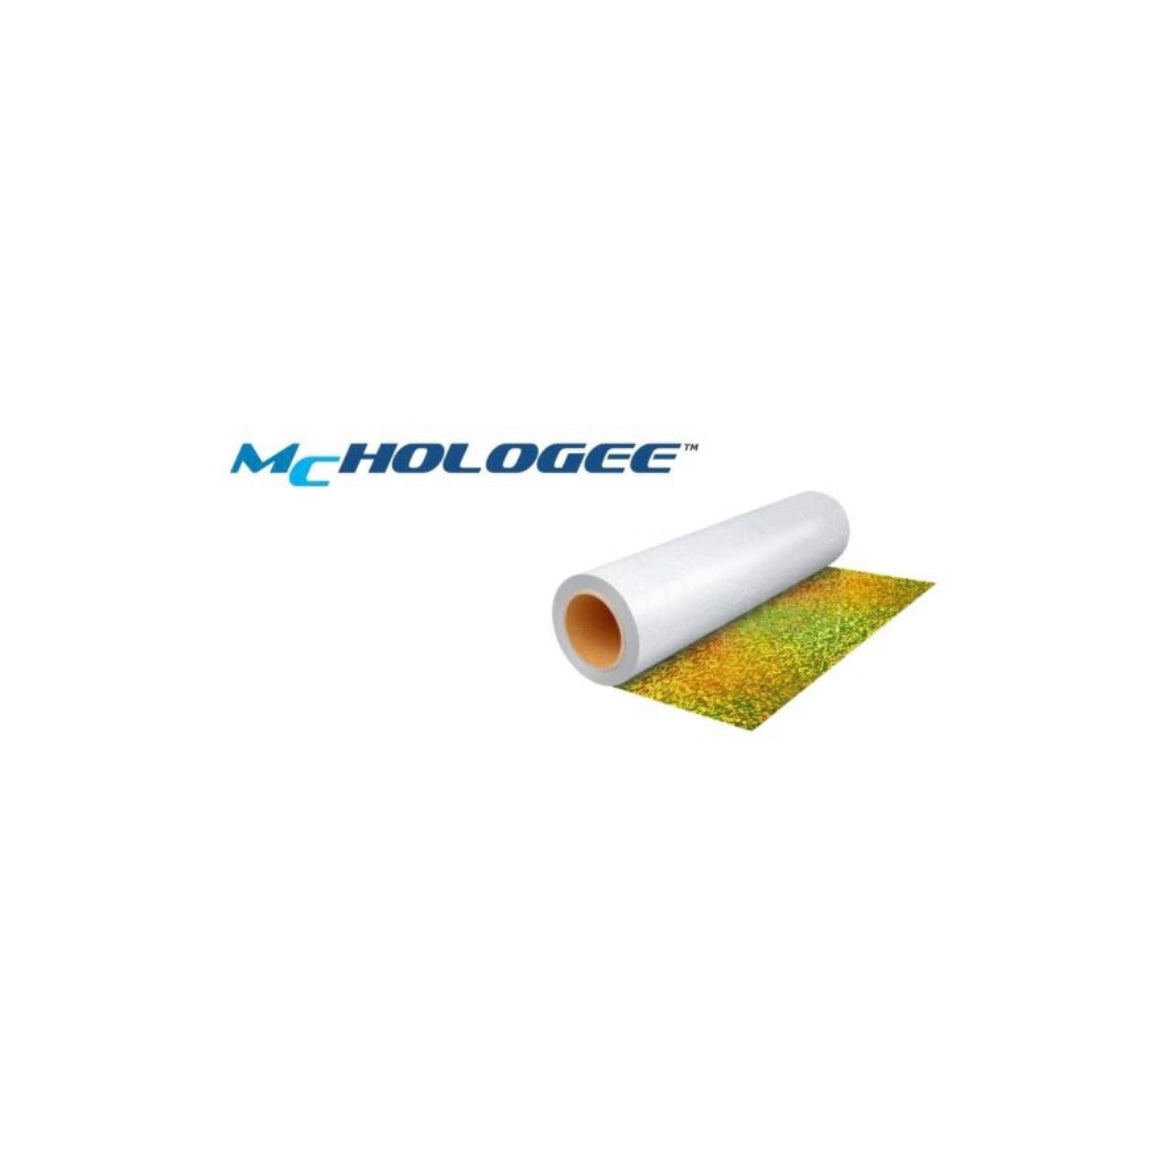 The Magic Touch Magi Cut Hologee,  (500 mm x 25 m) roll | The Magic Touch